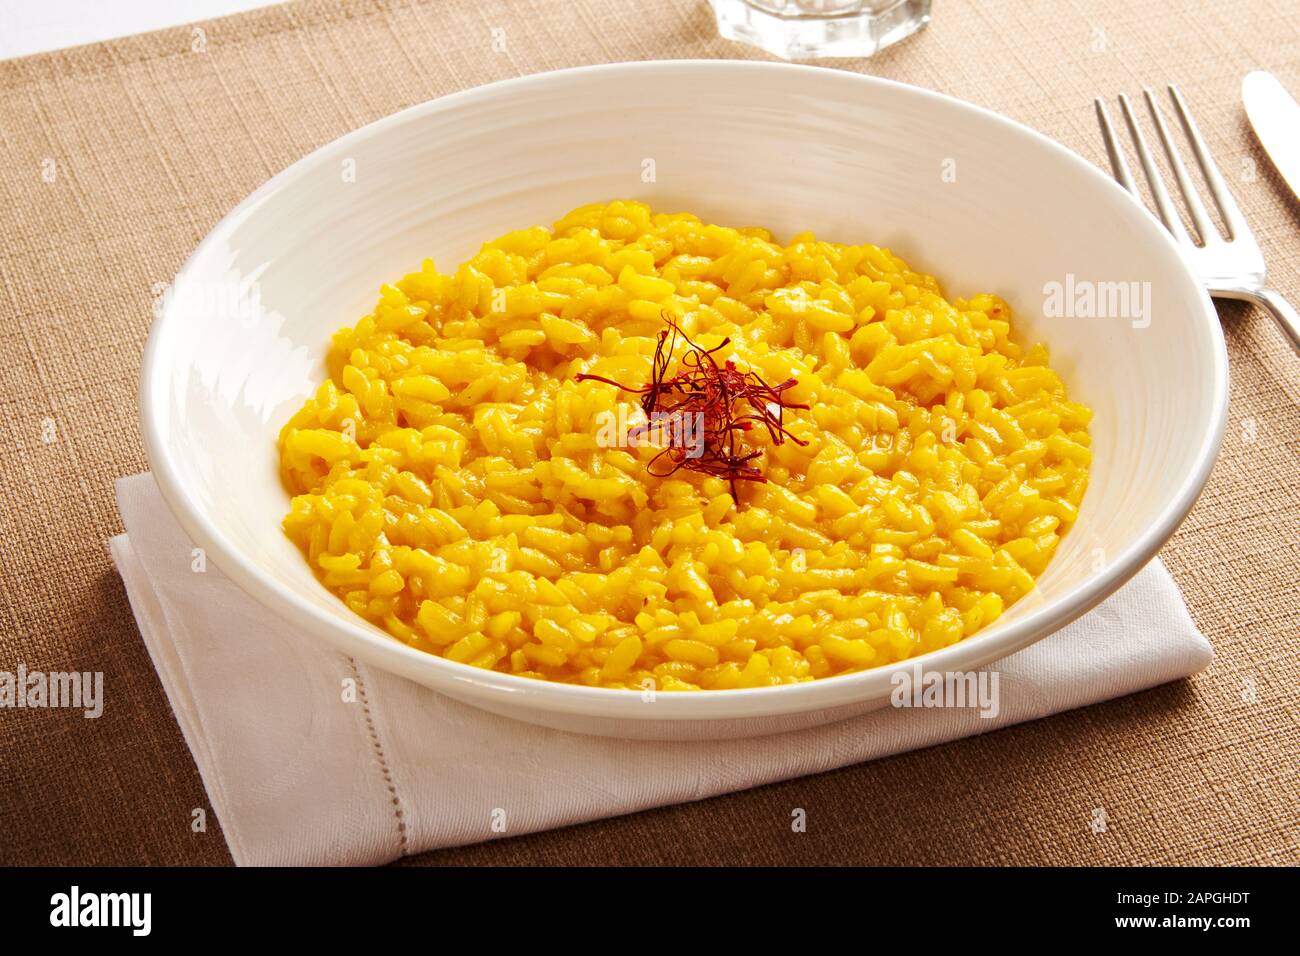 Bowl of creamy yellow risotto rice with saffron threads from the Lombardy region of Italy served in a white bowl at table Stock Photo